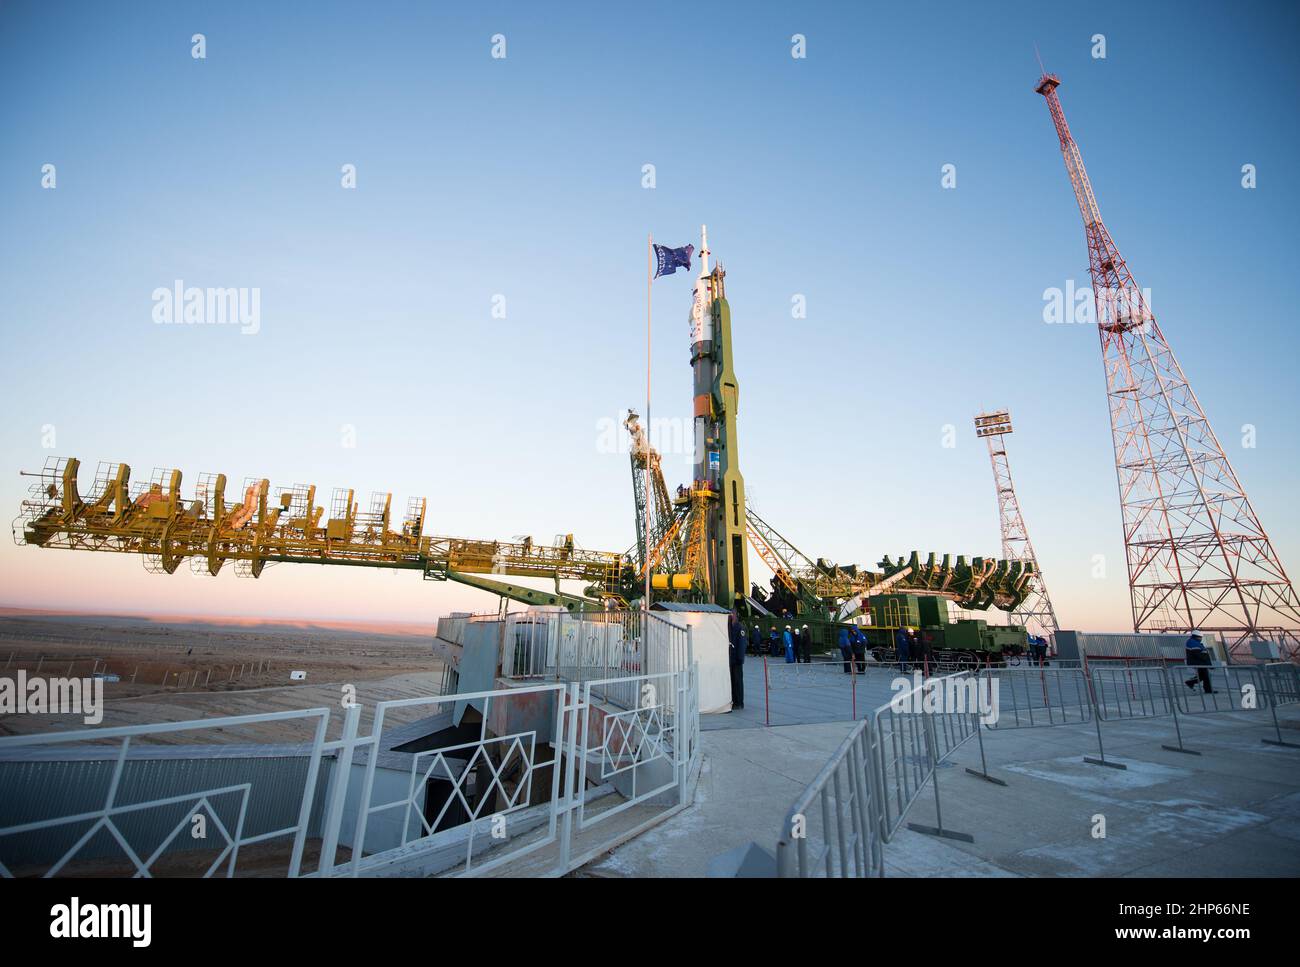 The Soyuz TMA-15M spacecraft is seen after being raised into a vertical position on the launch pad on Friday, Nov. 21, 2014 at the Baikonur Cosmodrome in Kazakhstan. Stock Photo